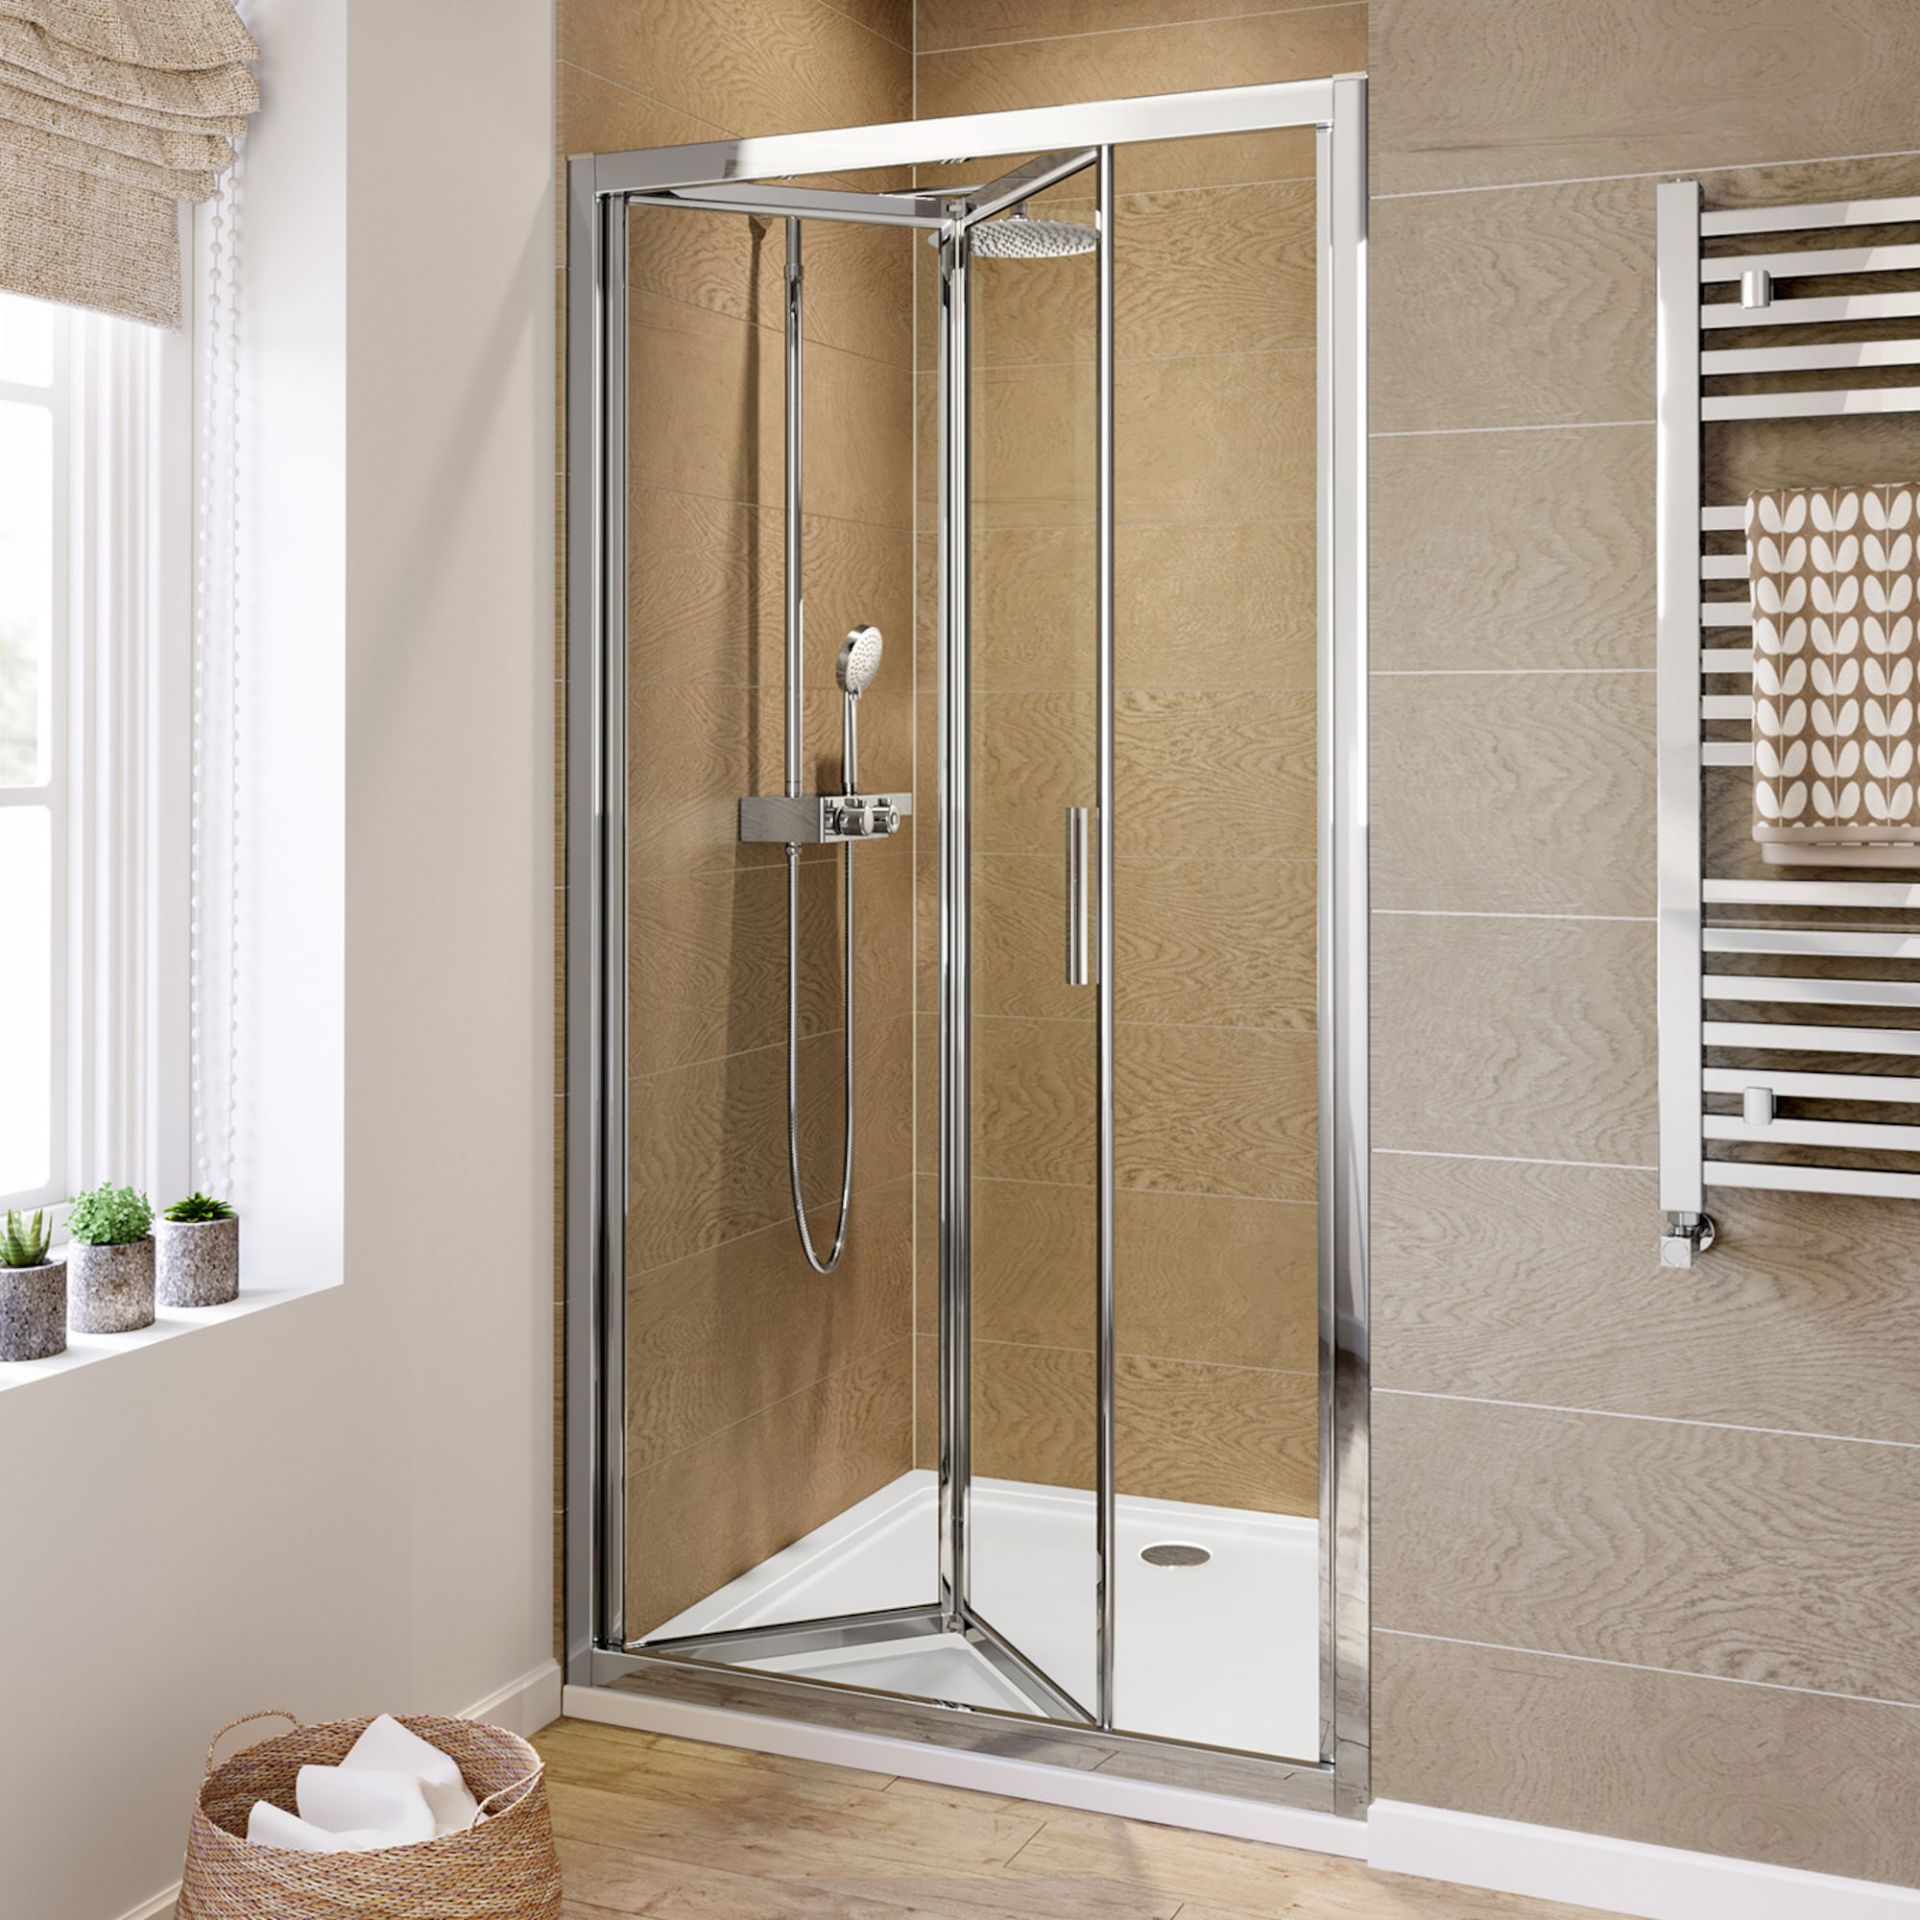 (JF30) 1000mm - 6mm - Elements EasyClean Bifold Shower Door. 6mm Safety Glass - Single-sided Ea...